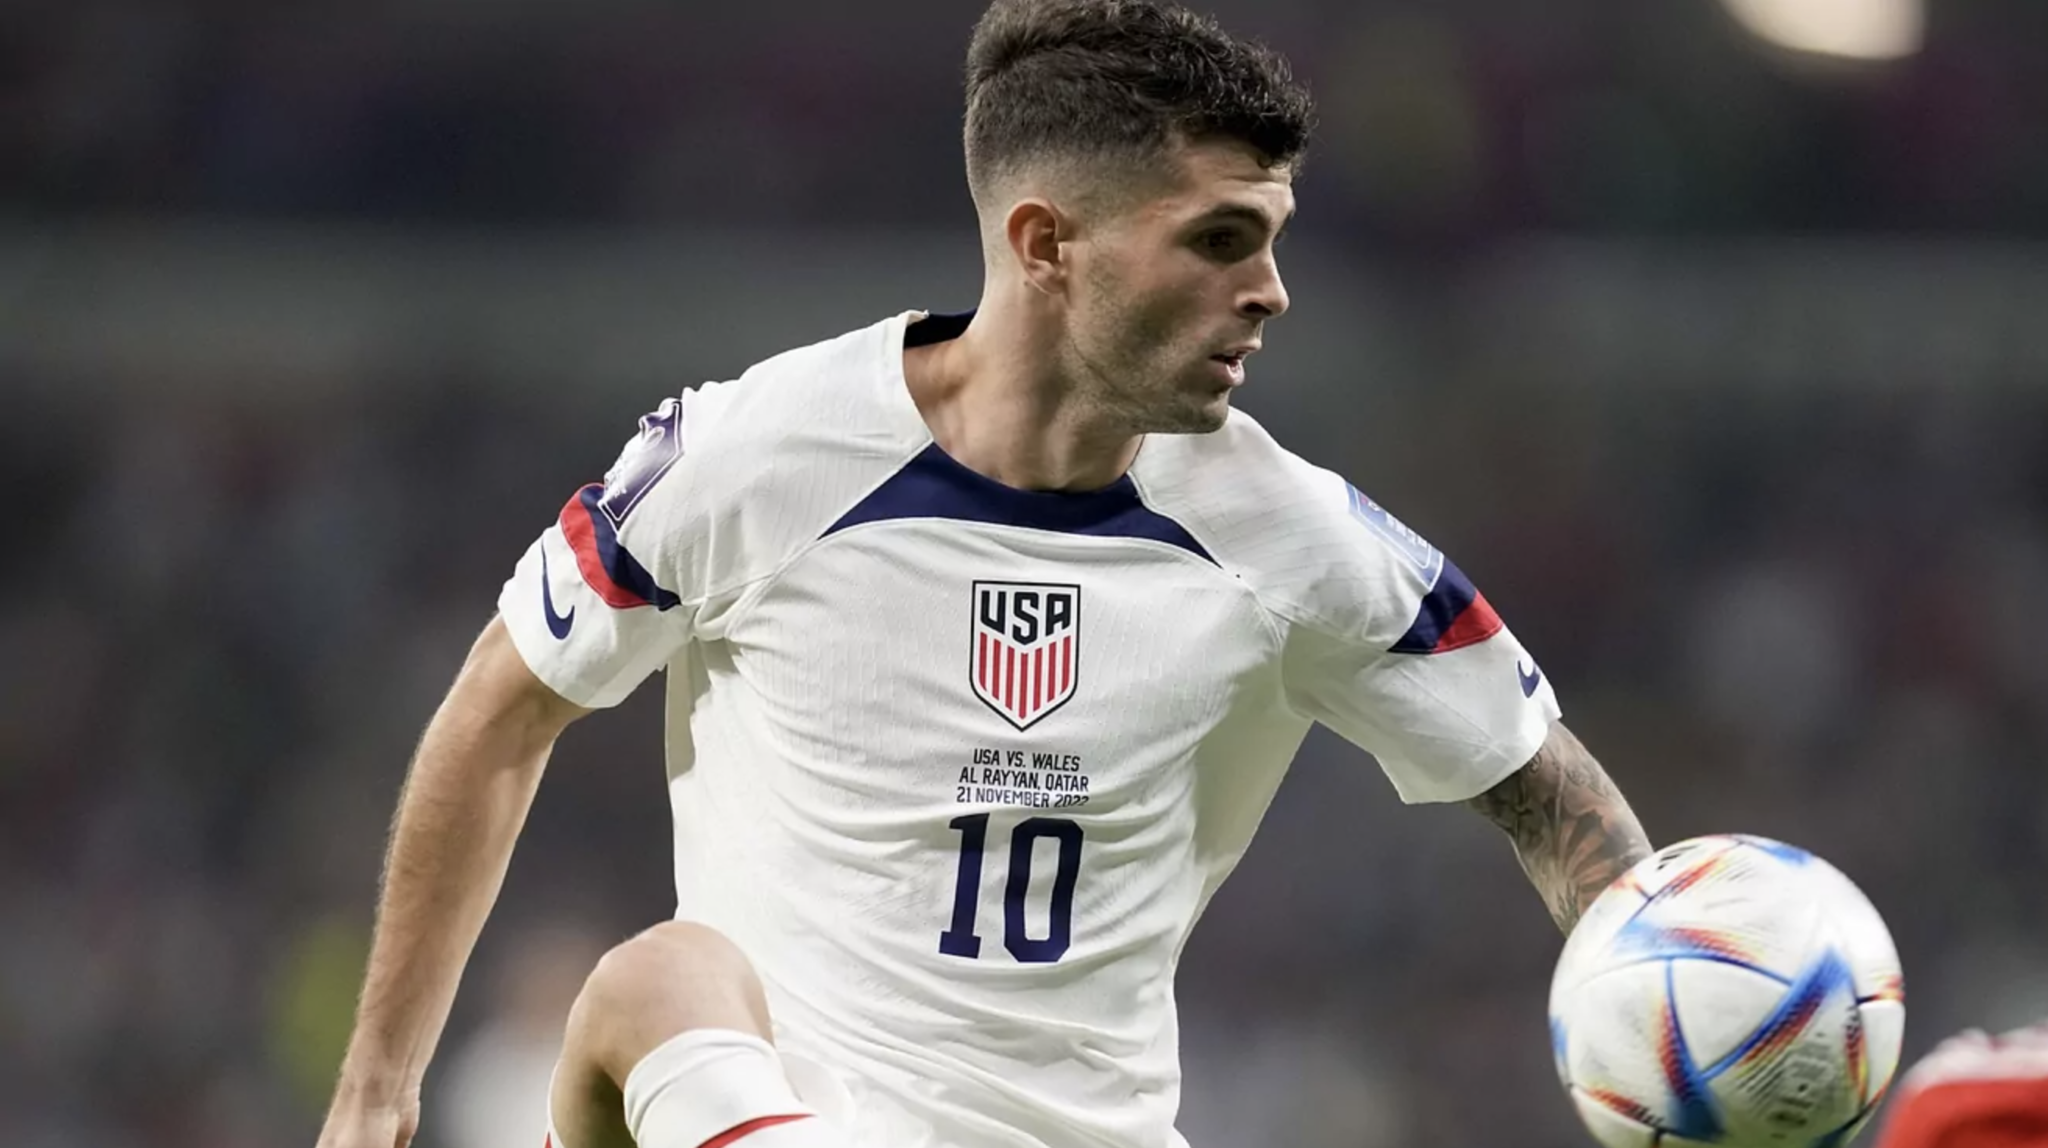 Christian Pulisic will likely leave Chelsea and is on Real Madrid's radar